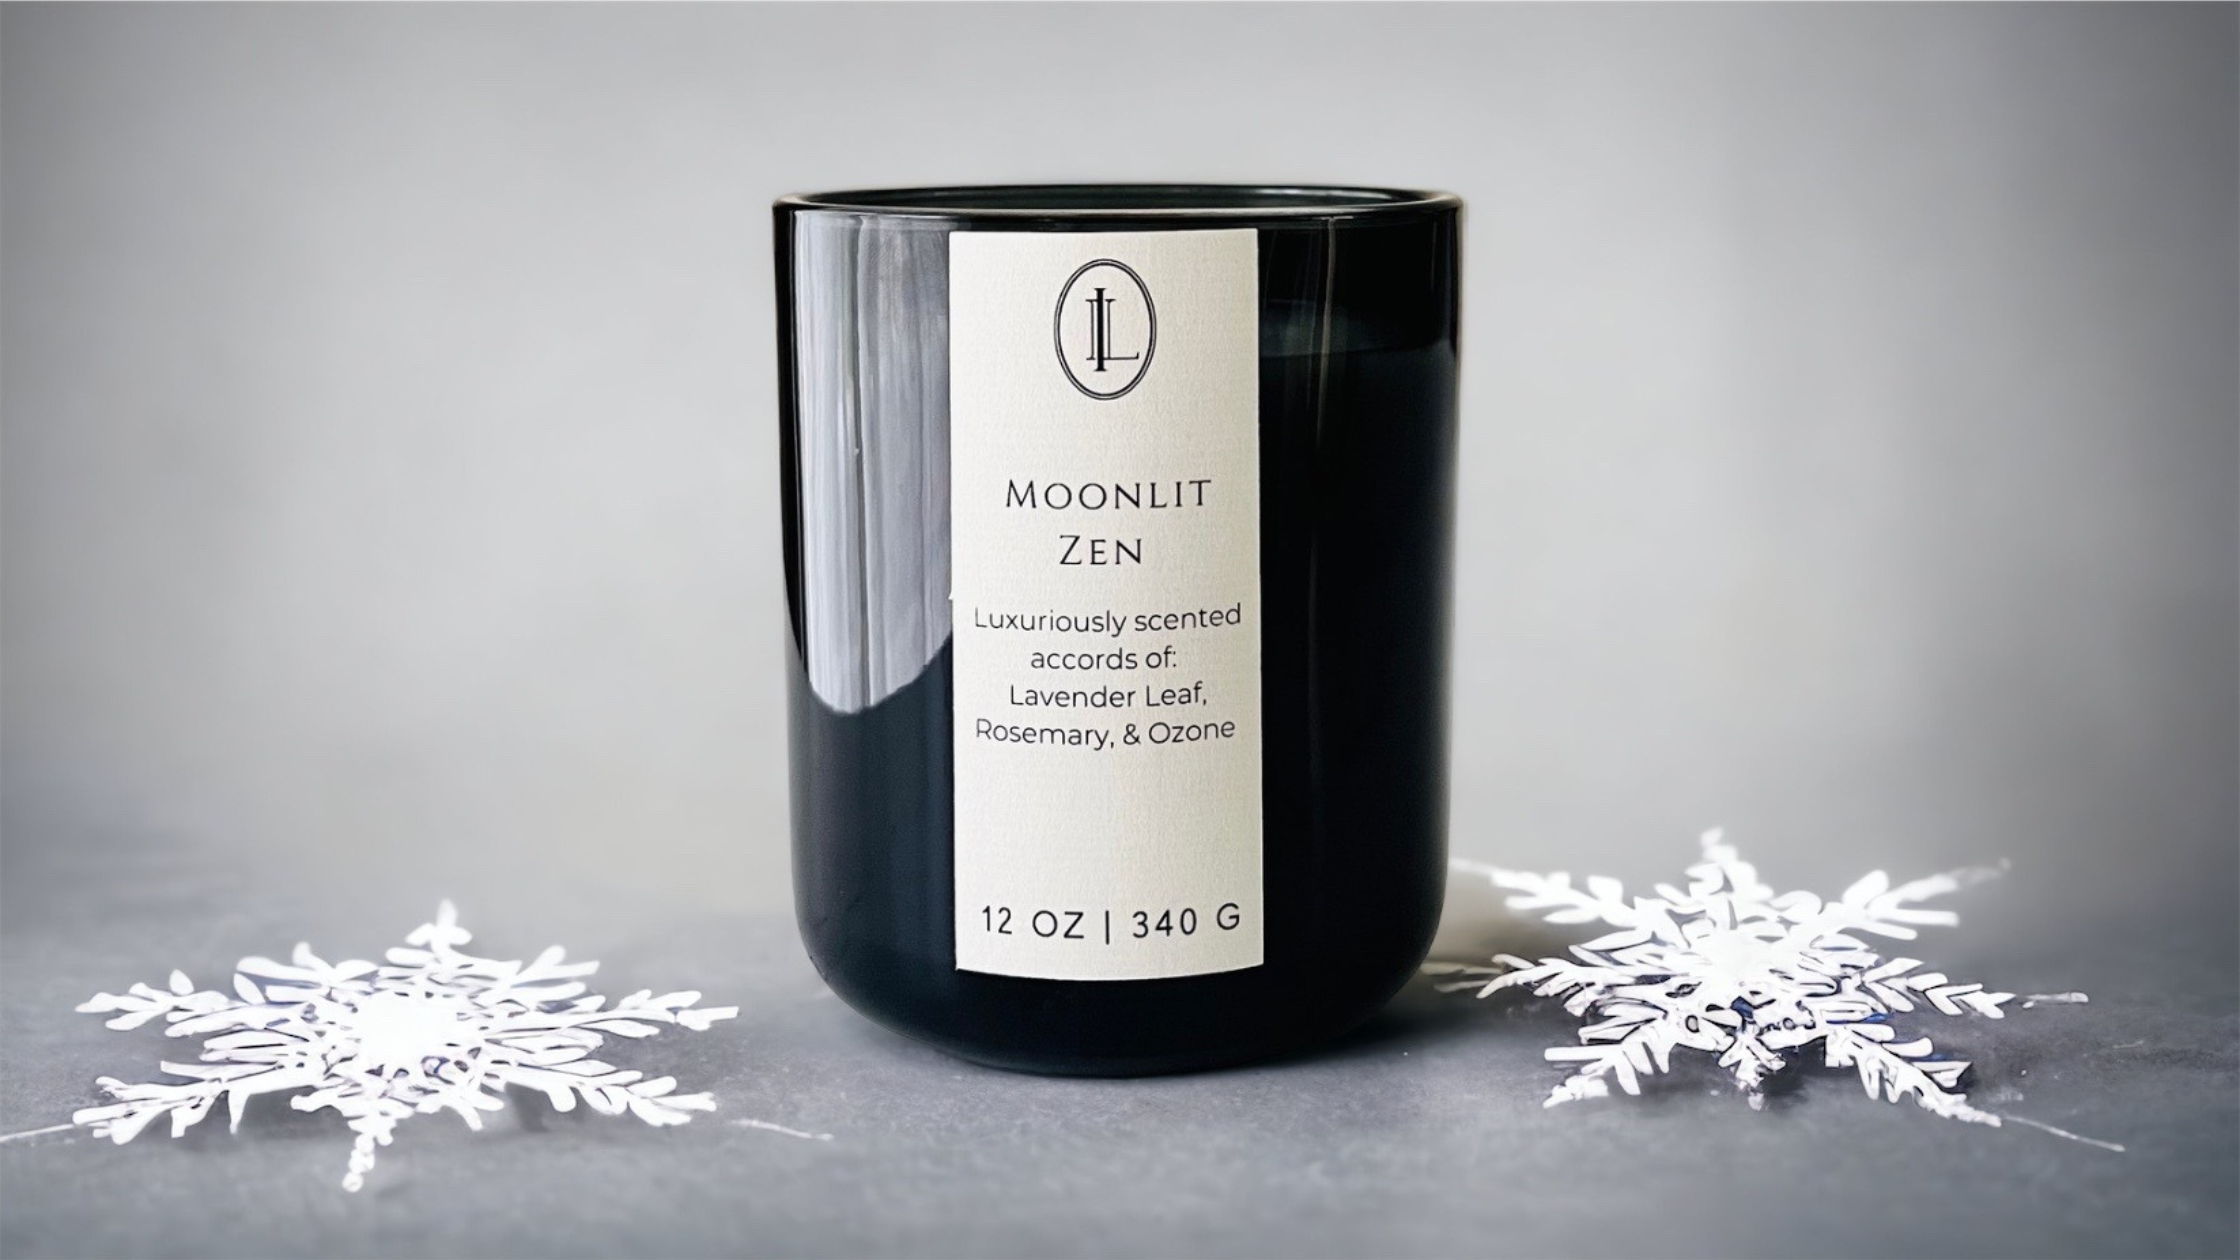 https://cdn.shopify.com/s/files/1/0416/1739/1774/files/image-of-moonlit-zen-candle-on-gray-background-with-snowflakes.png?v=1699884250